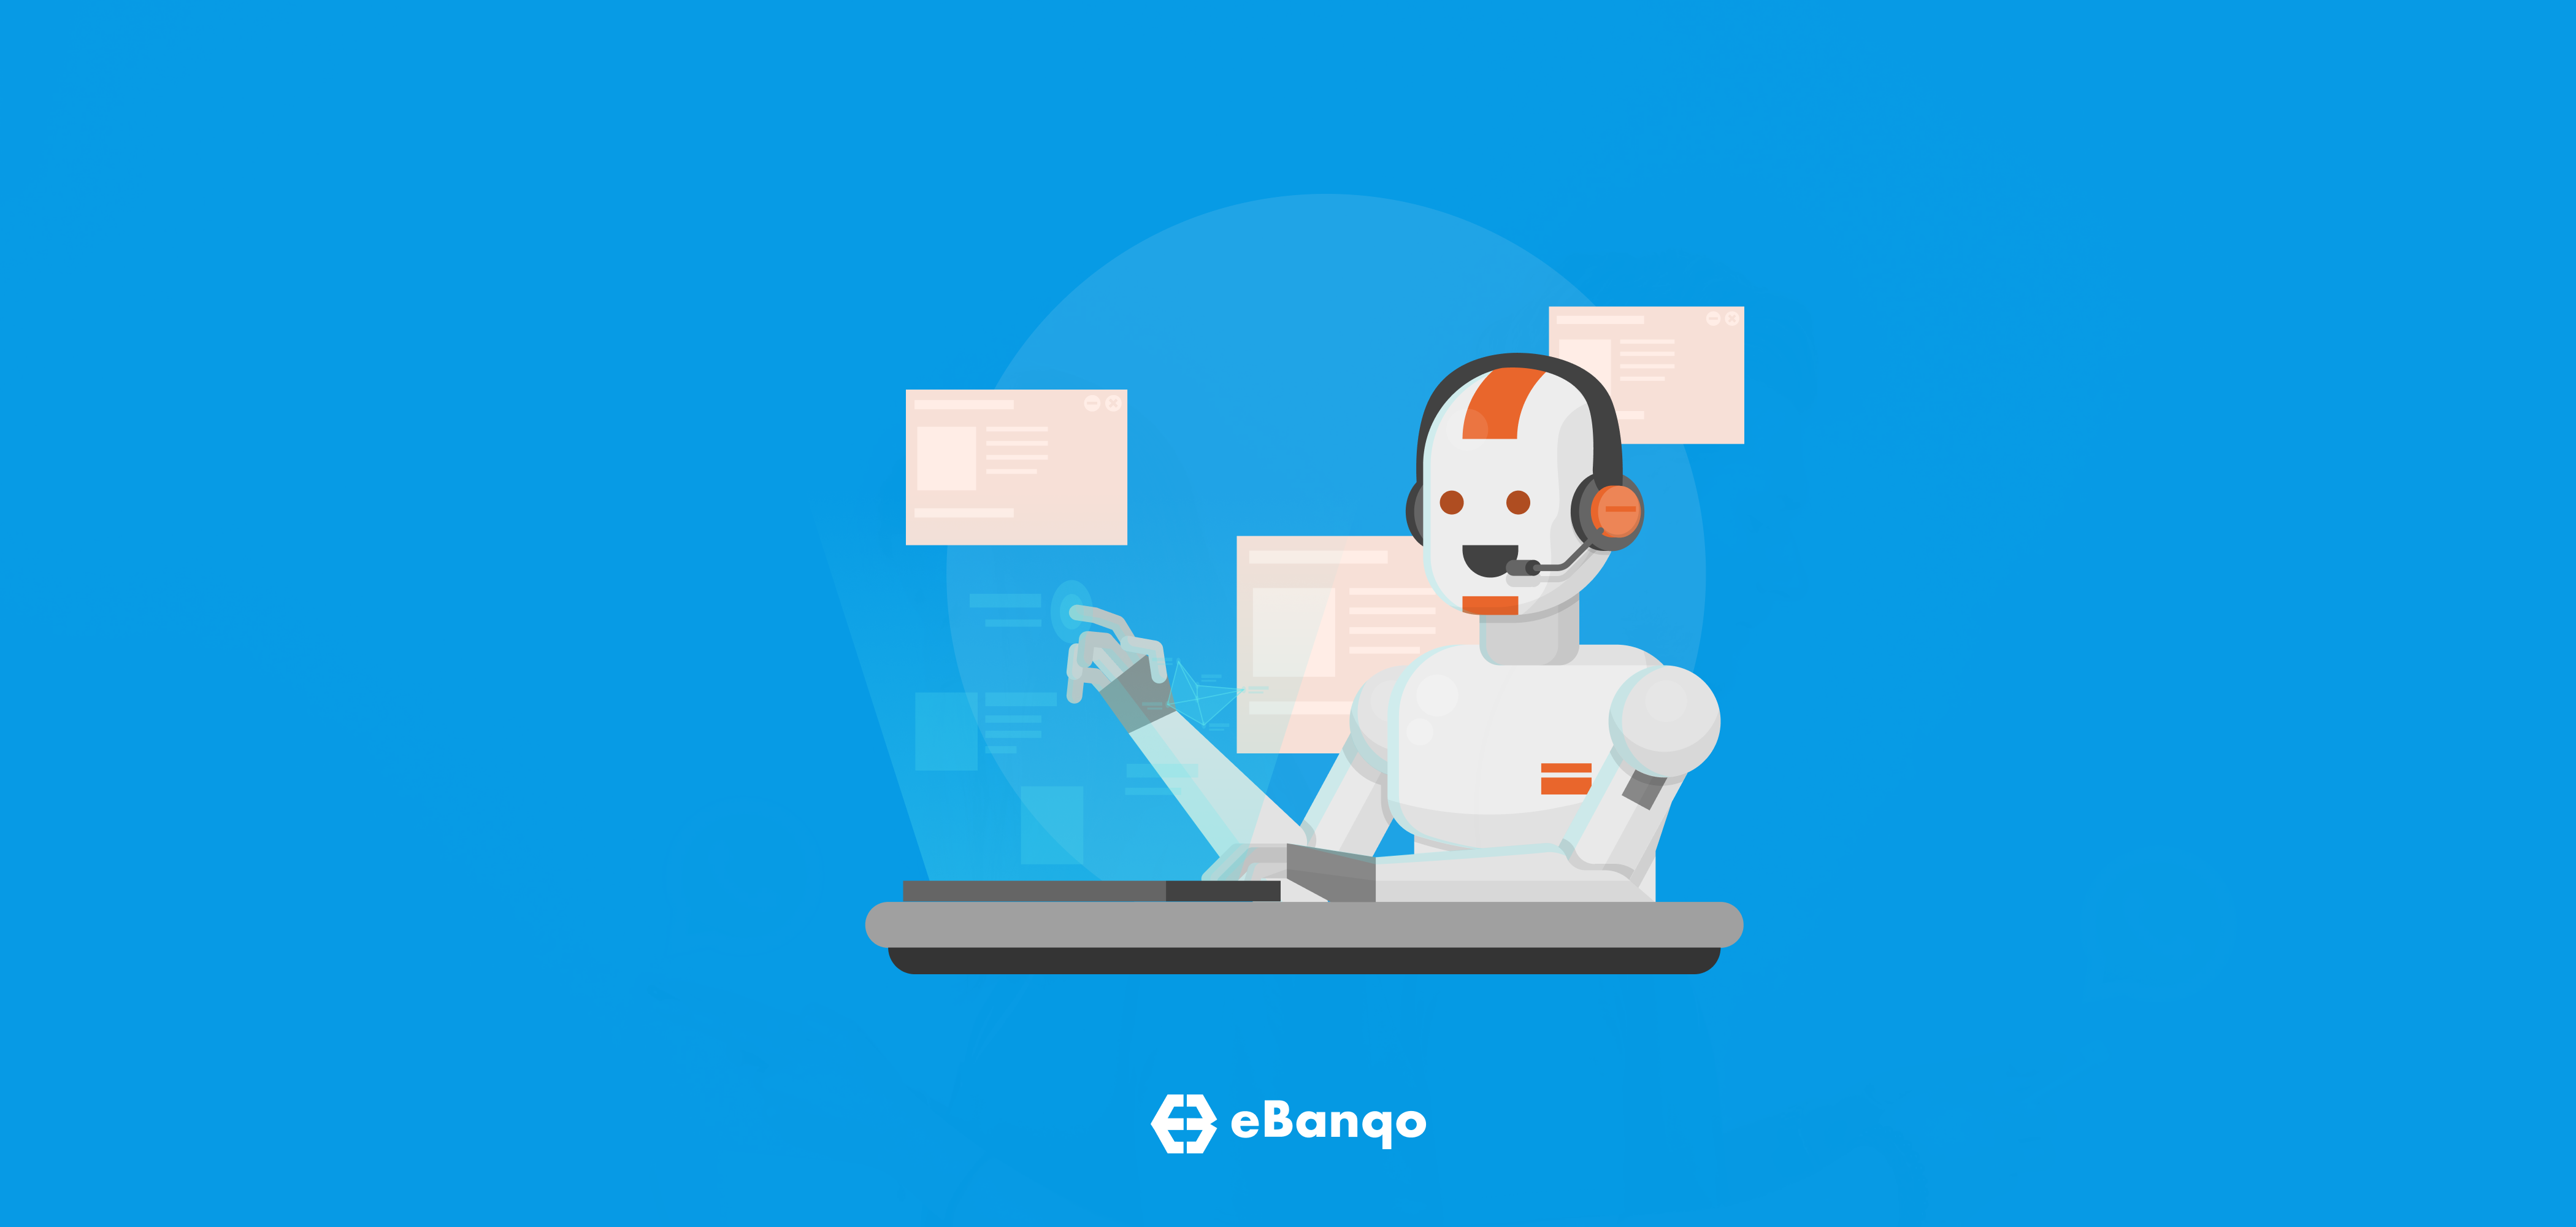 How to build a customer service chatbot